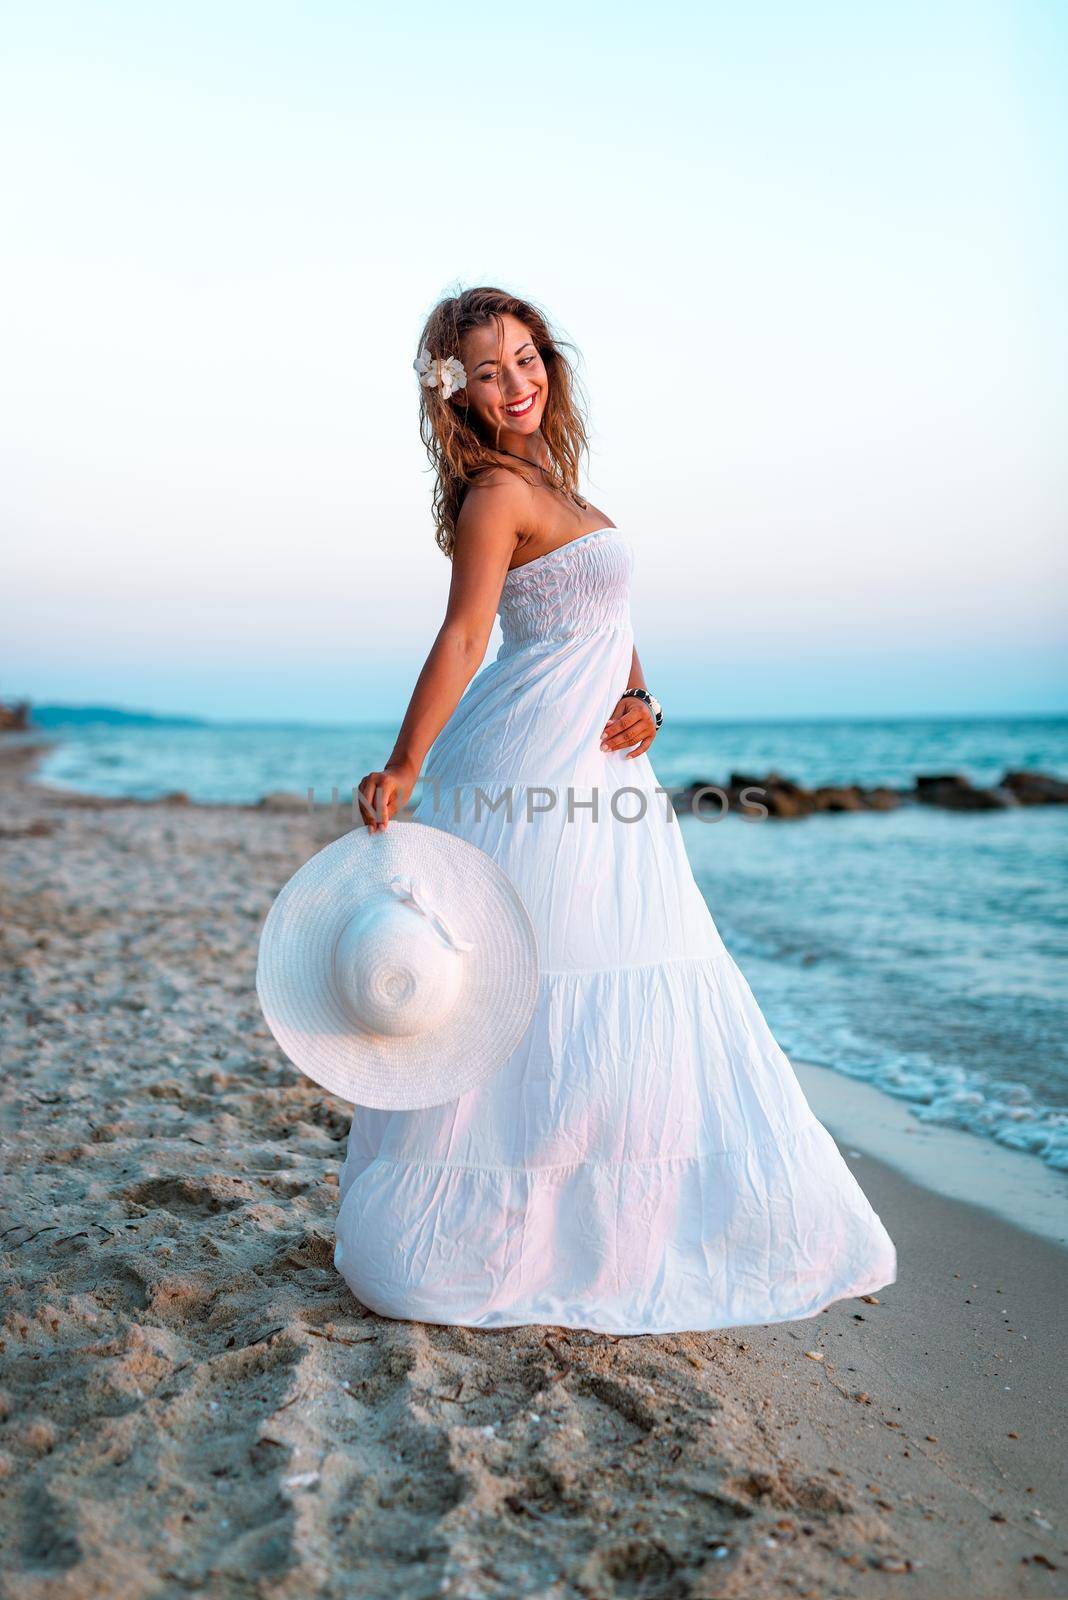 Beautiful young smiling woman in white dress walking on the beach and holding white summer hat.